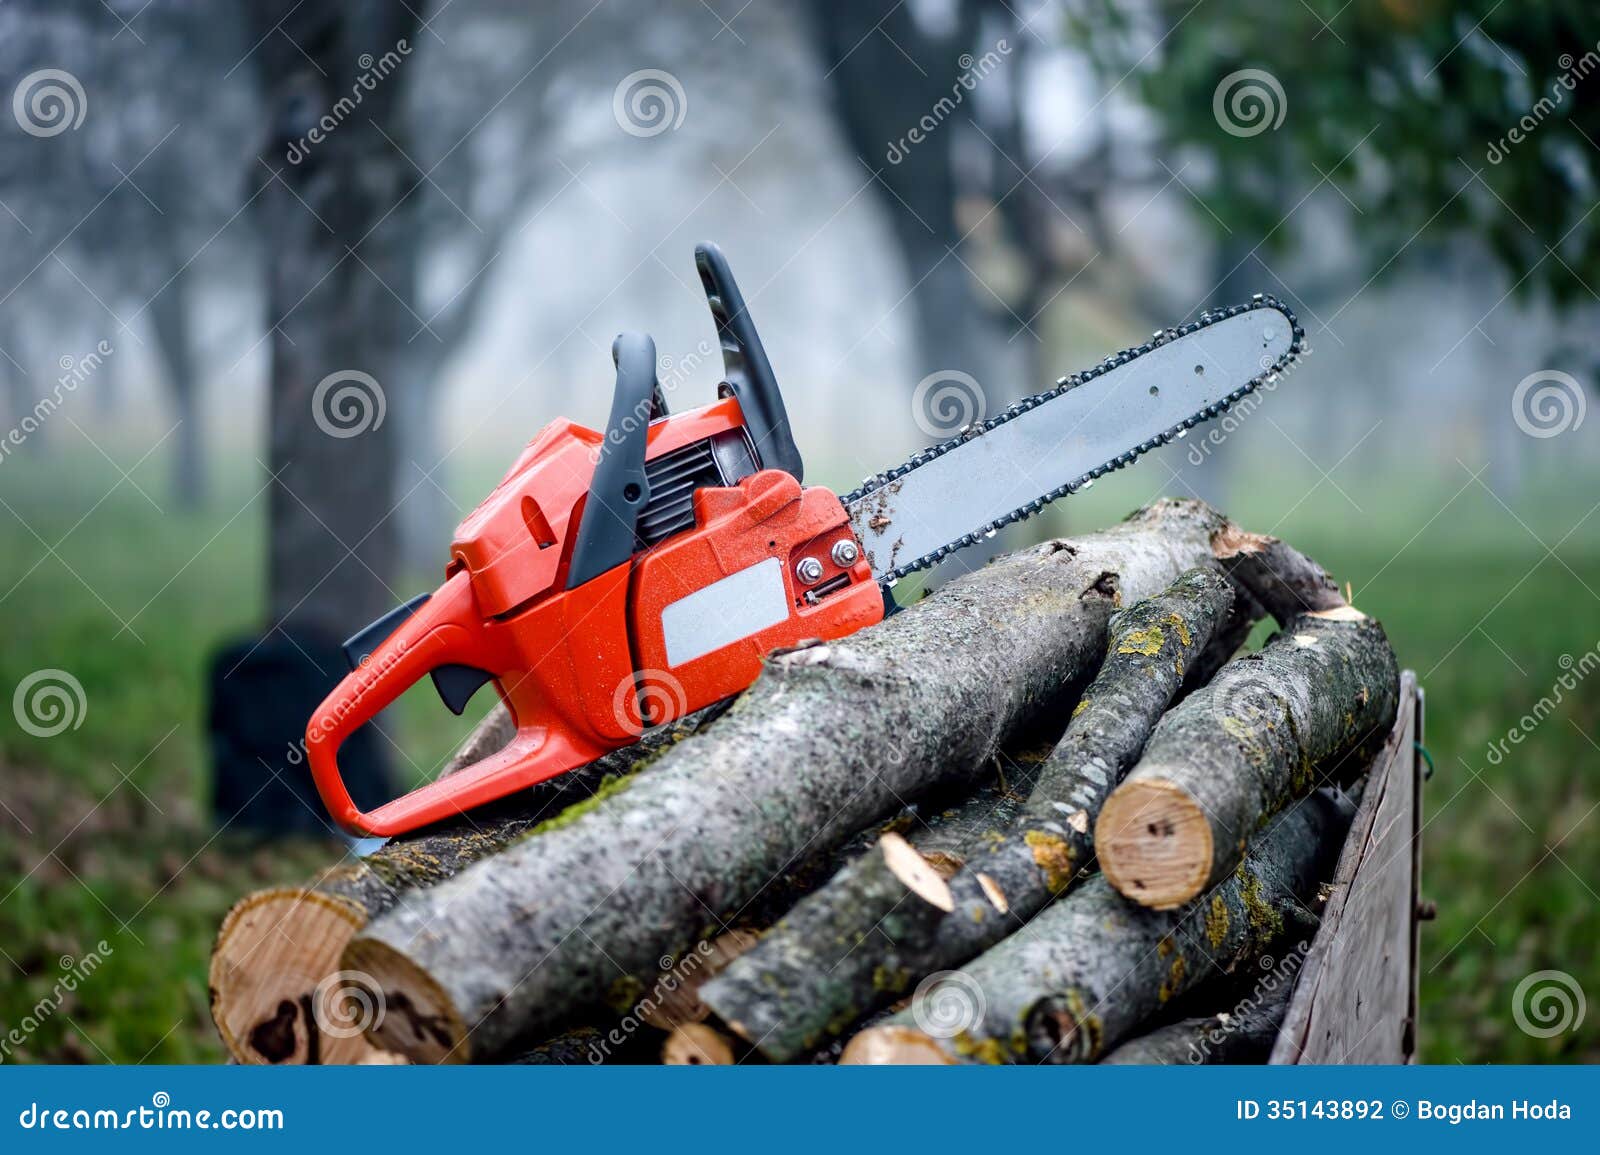 gasoline powered professional chainsaw on pile of cut wood